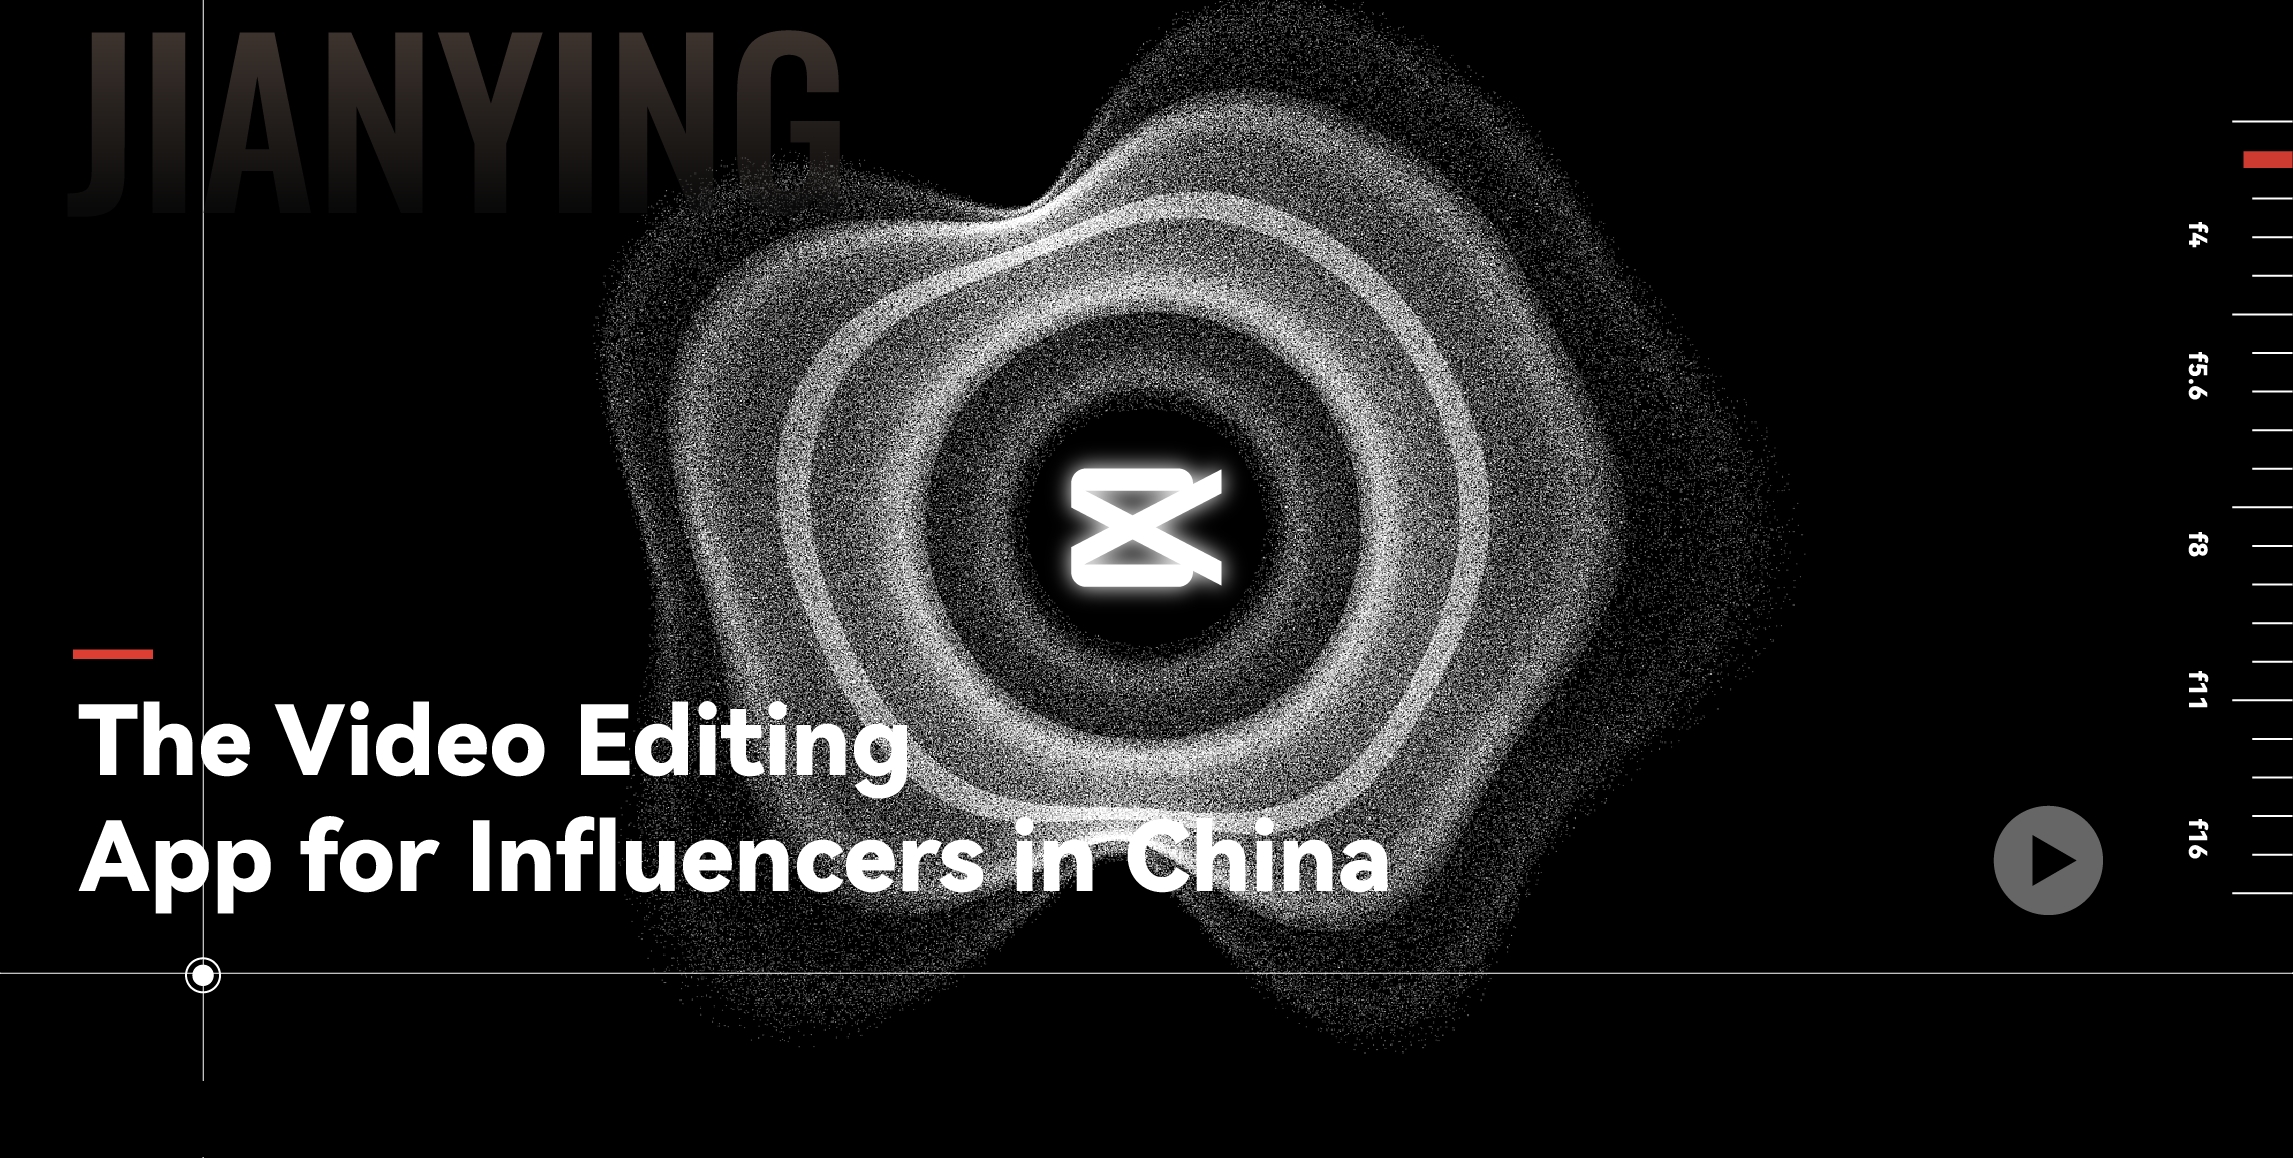 Advertising on Jianying: The Video Editing App for Influencers in China